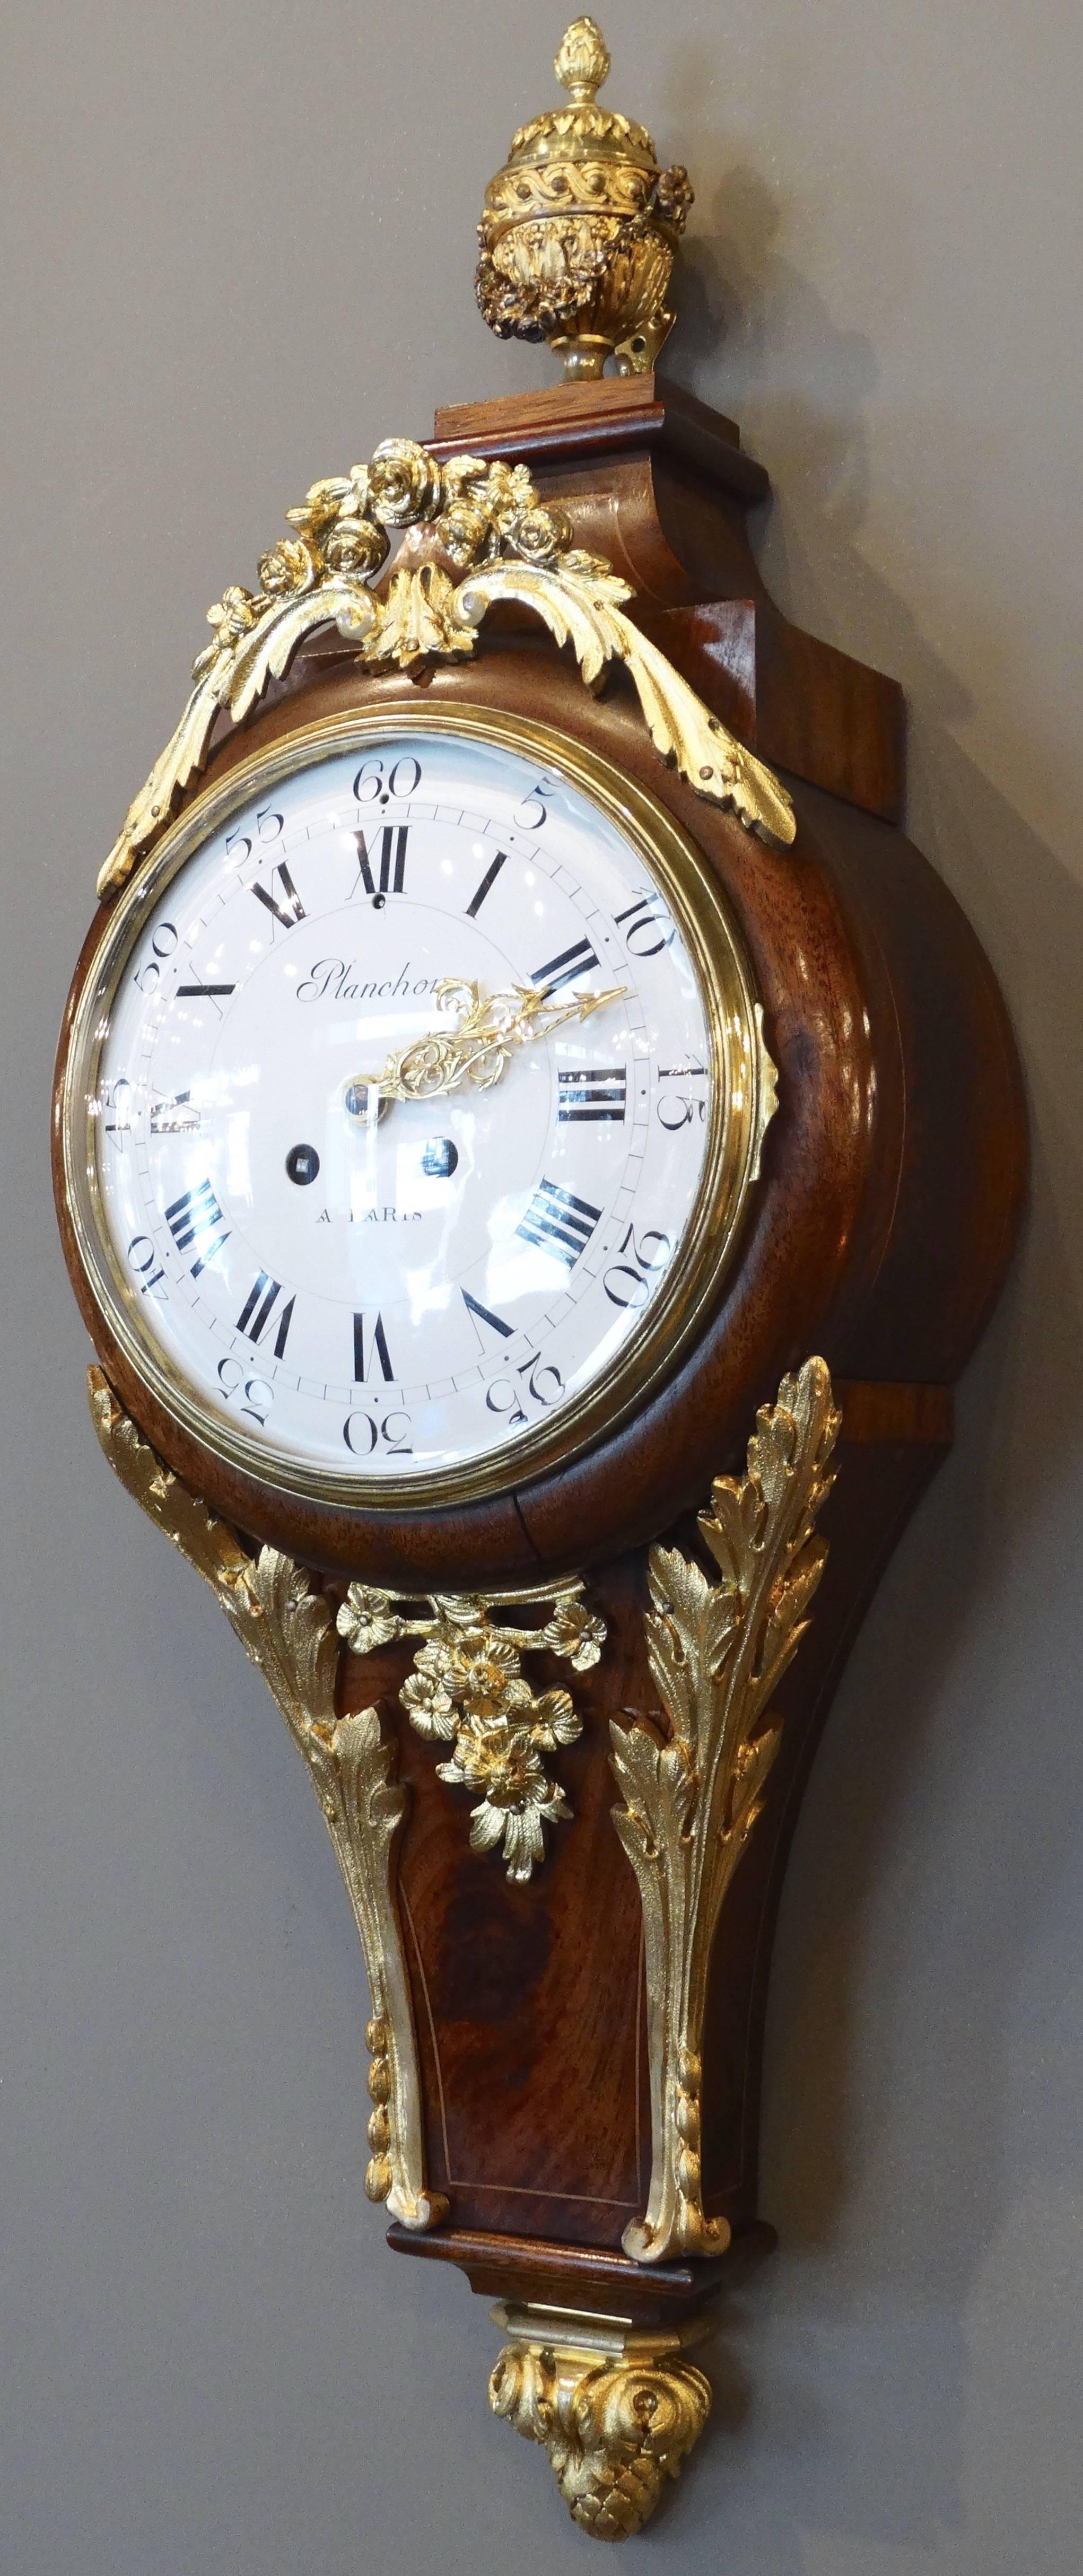 Extremely decorative clock (named Cartel in French) in mahogany inlaid with gorgeous chiselled and gilded bronzes representing Roses and acanthus leaves. Top is surmounted by a bronze doré' 